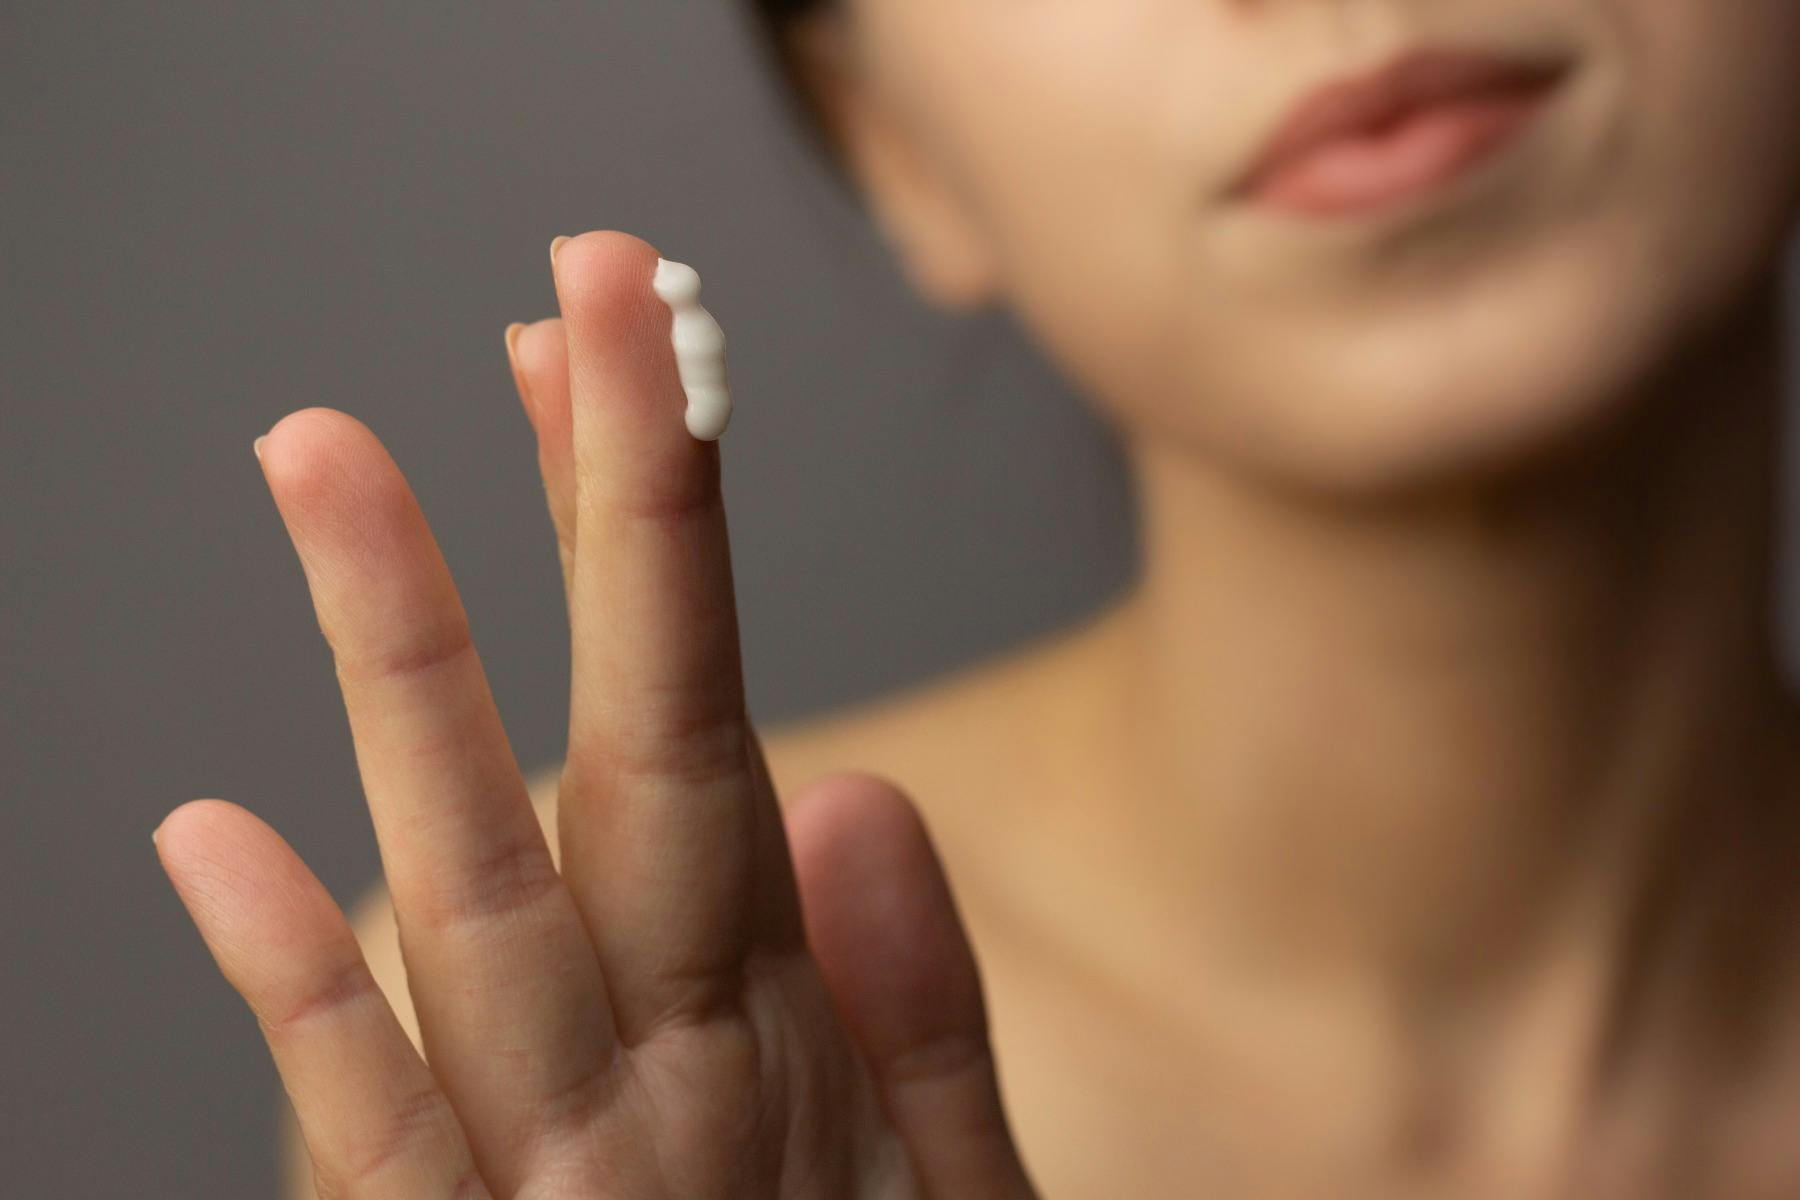 Lady applying Tretinoin cream to her fingertip to add it to her acne